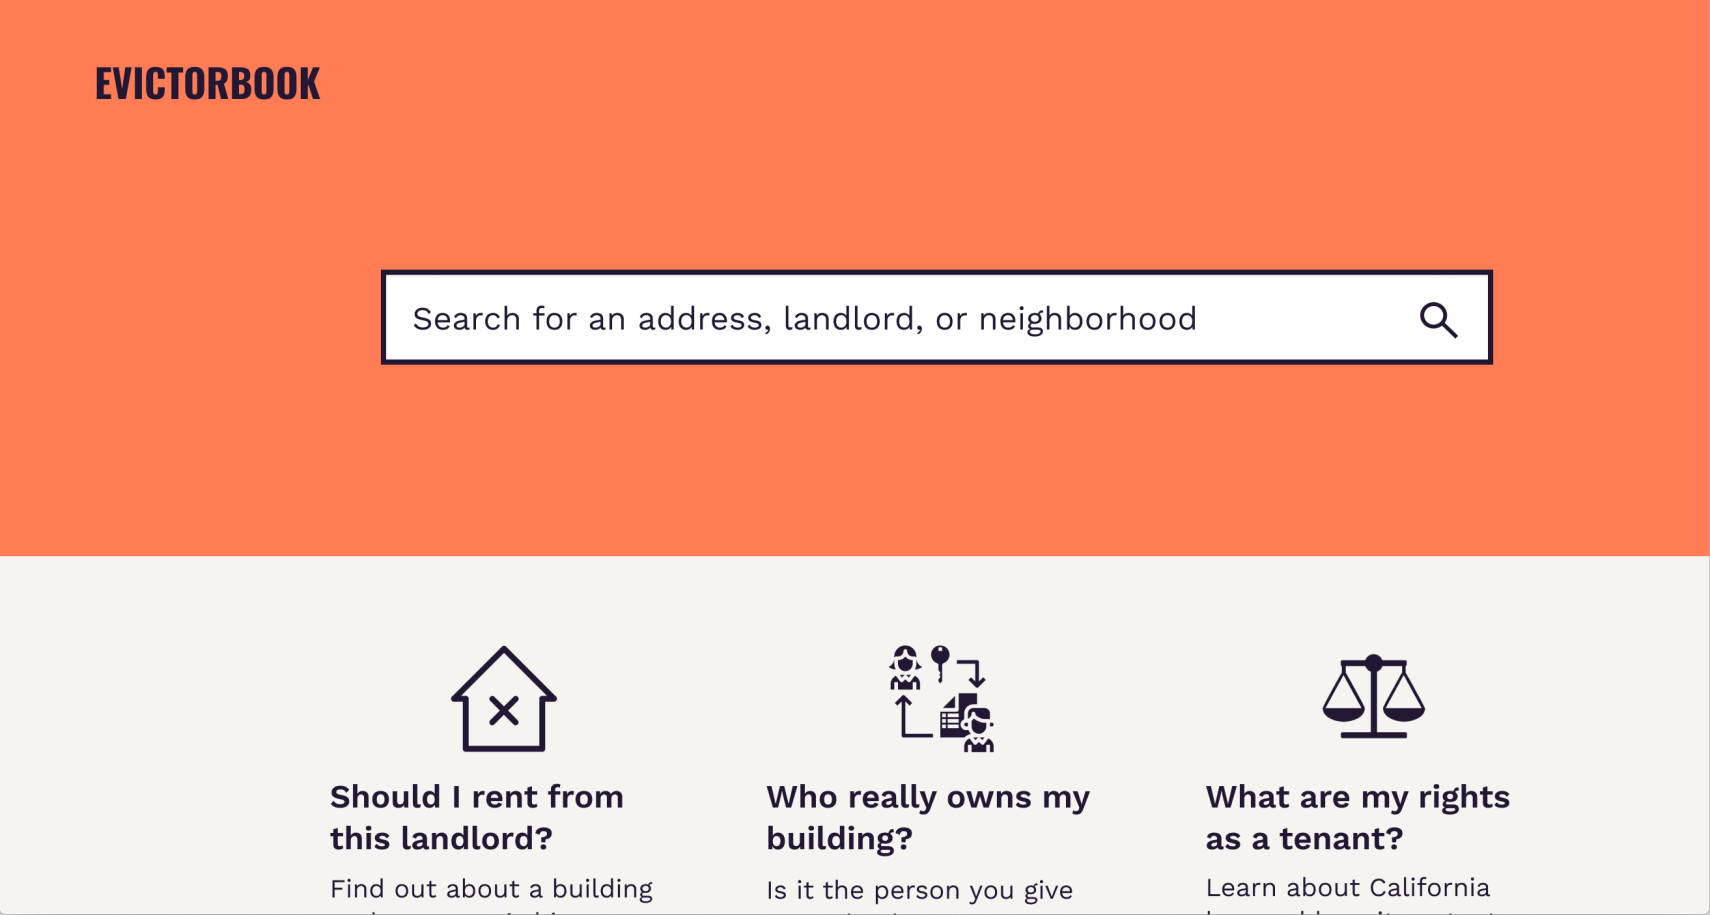 Mockup of evictorbook, a webpage showing prompt asking a user to search for an address, landlord, or neighborhood.